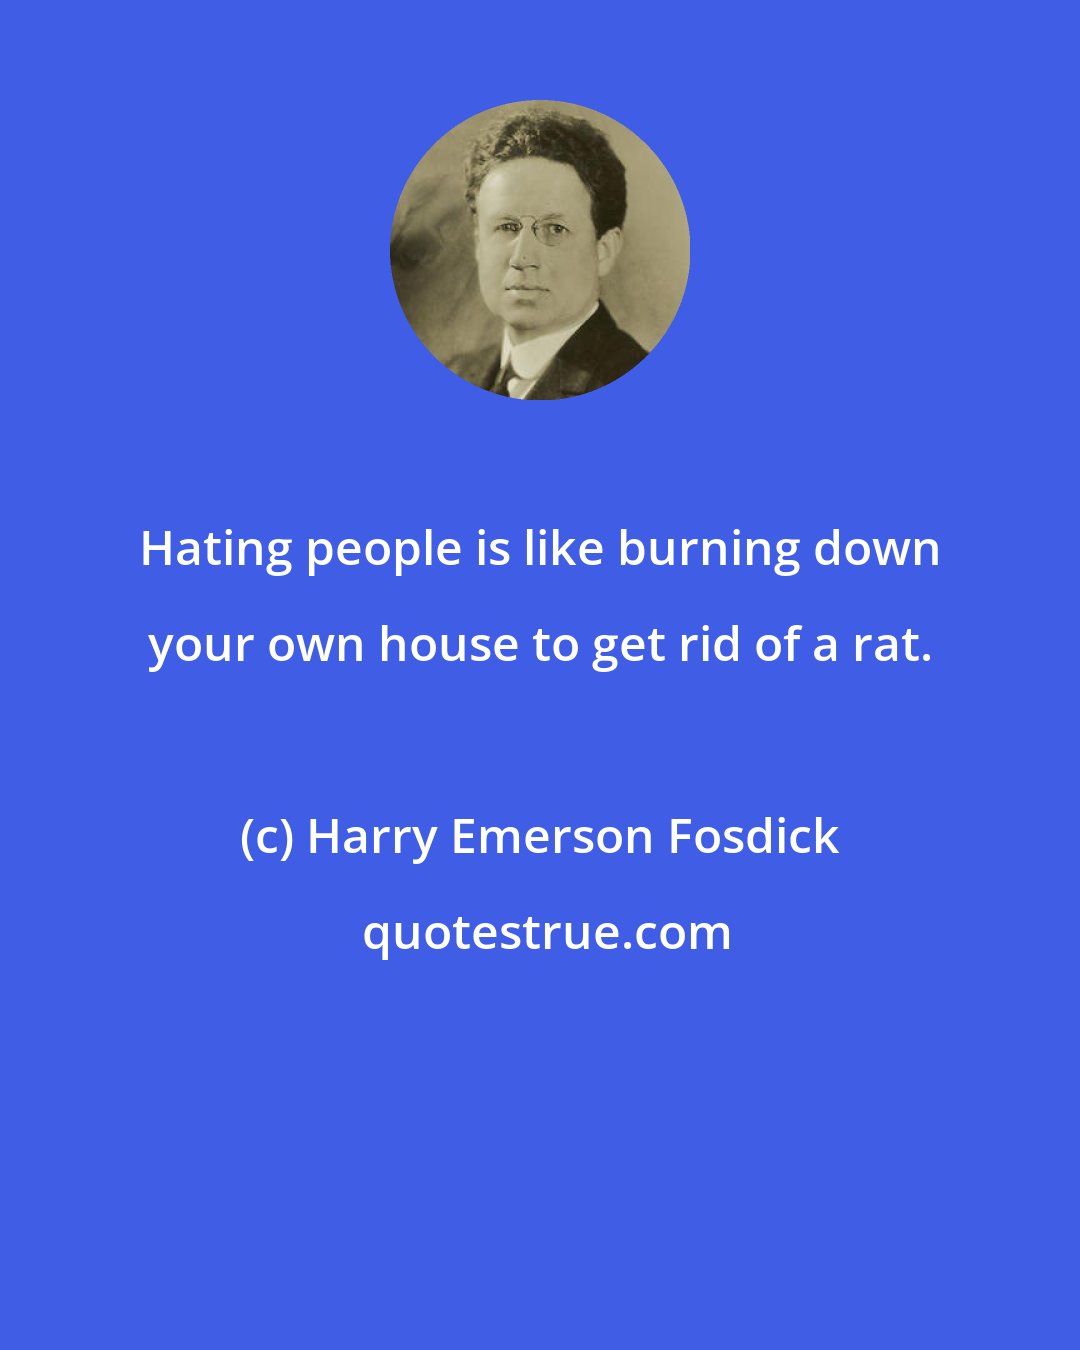 Harry Emerson Fosdick: Hating people is like burning down your own house to get rid of a rat.